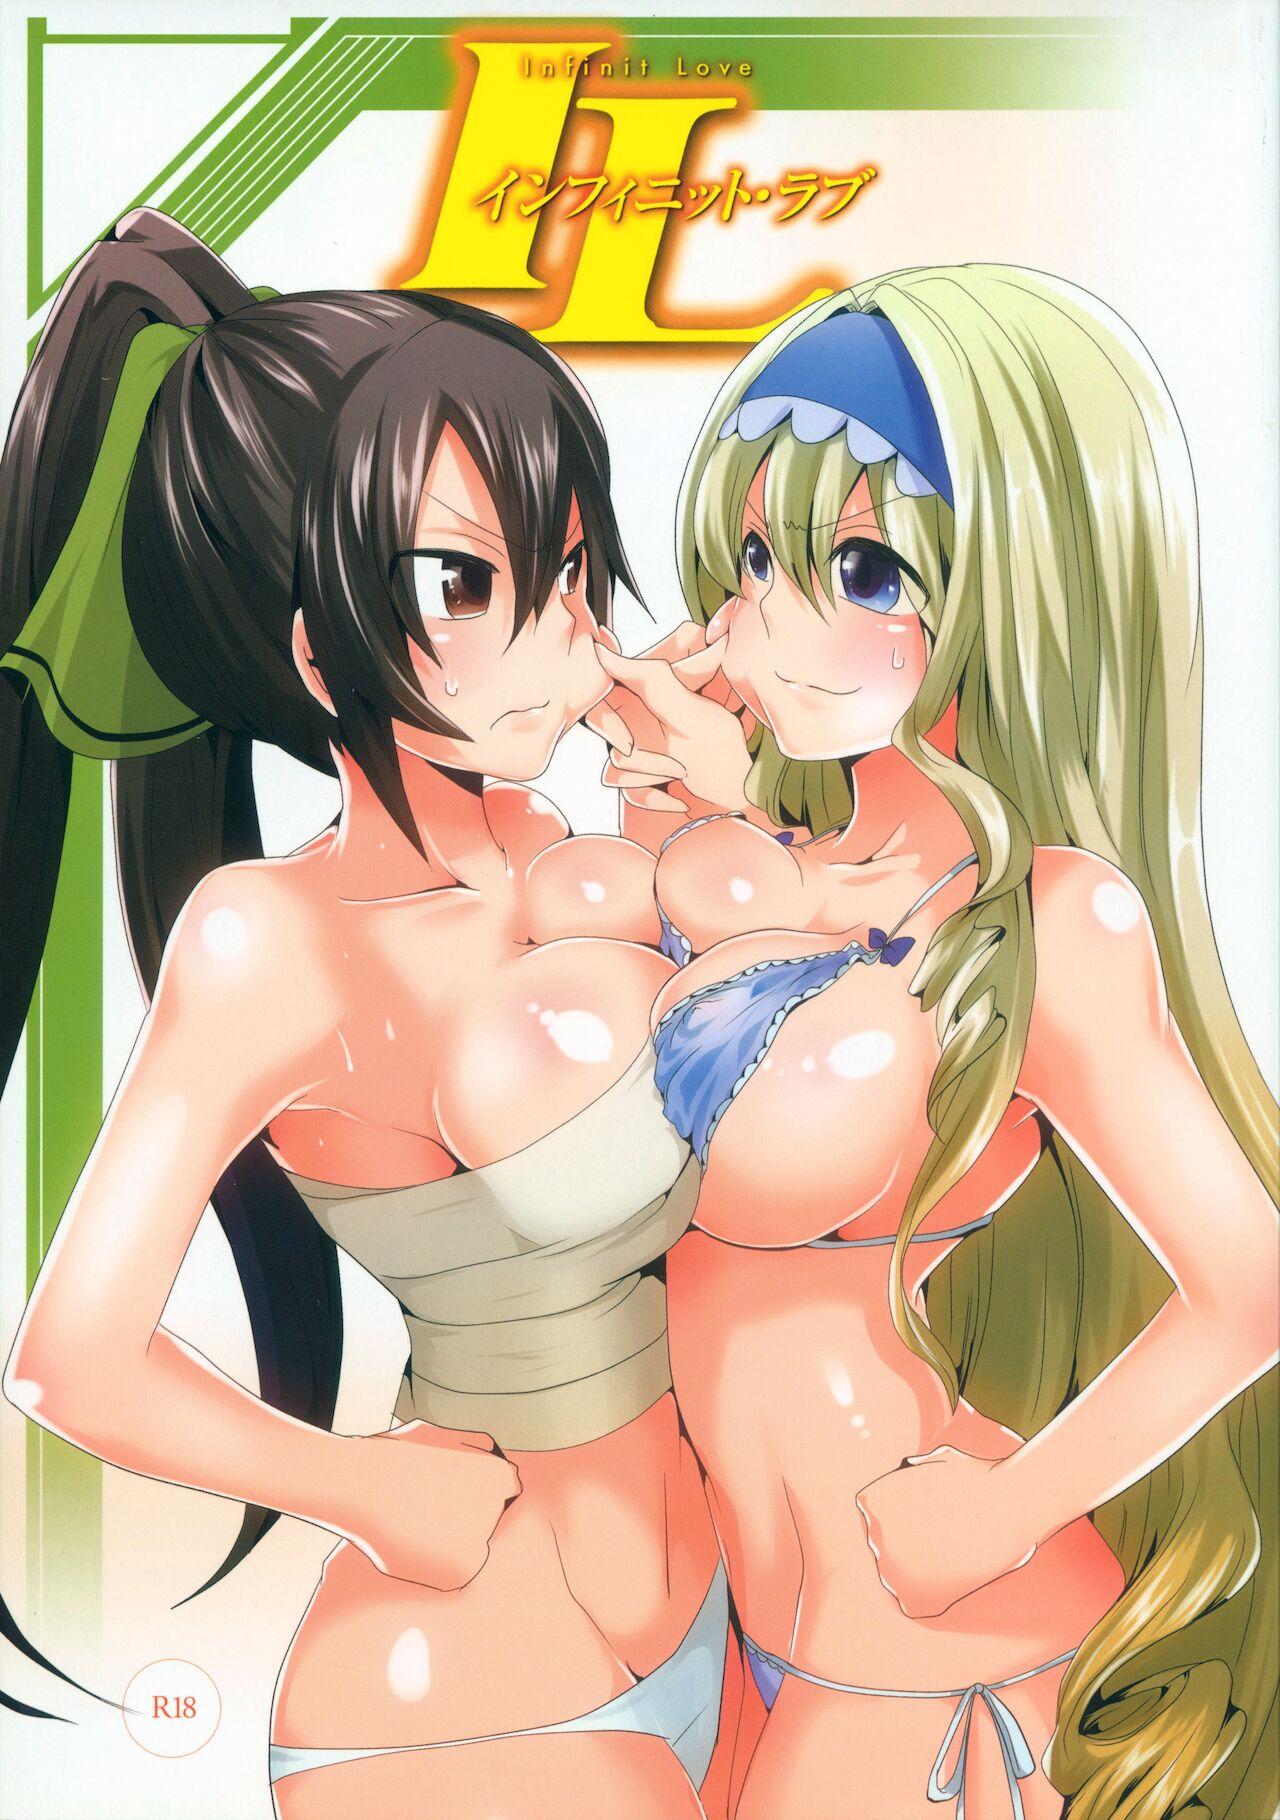 Fitness Infinit Love - Infinite stratos Oral Sex Porn - Page 1